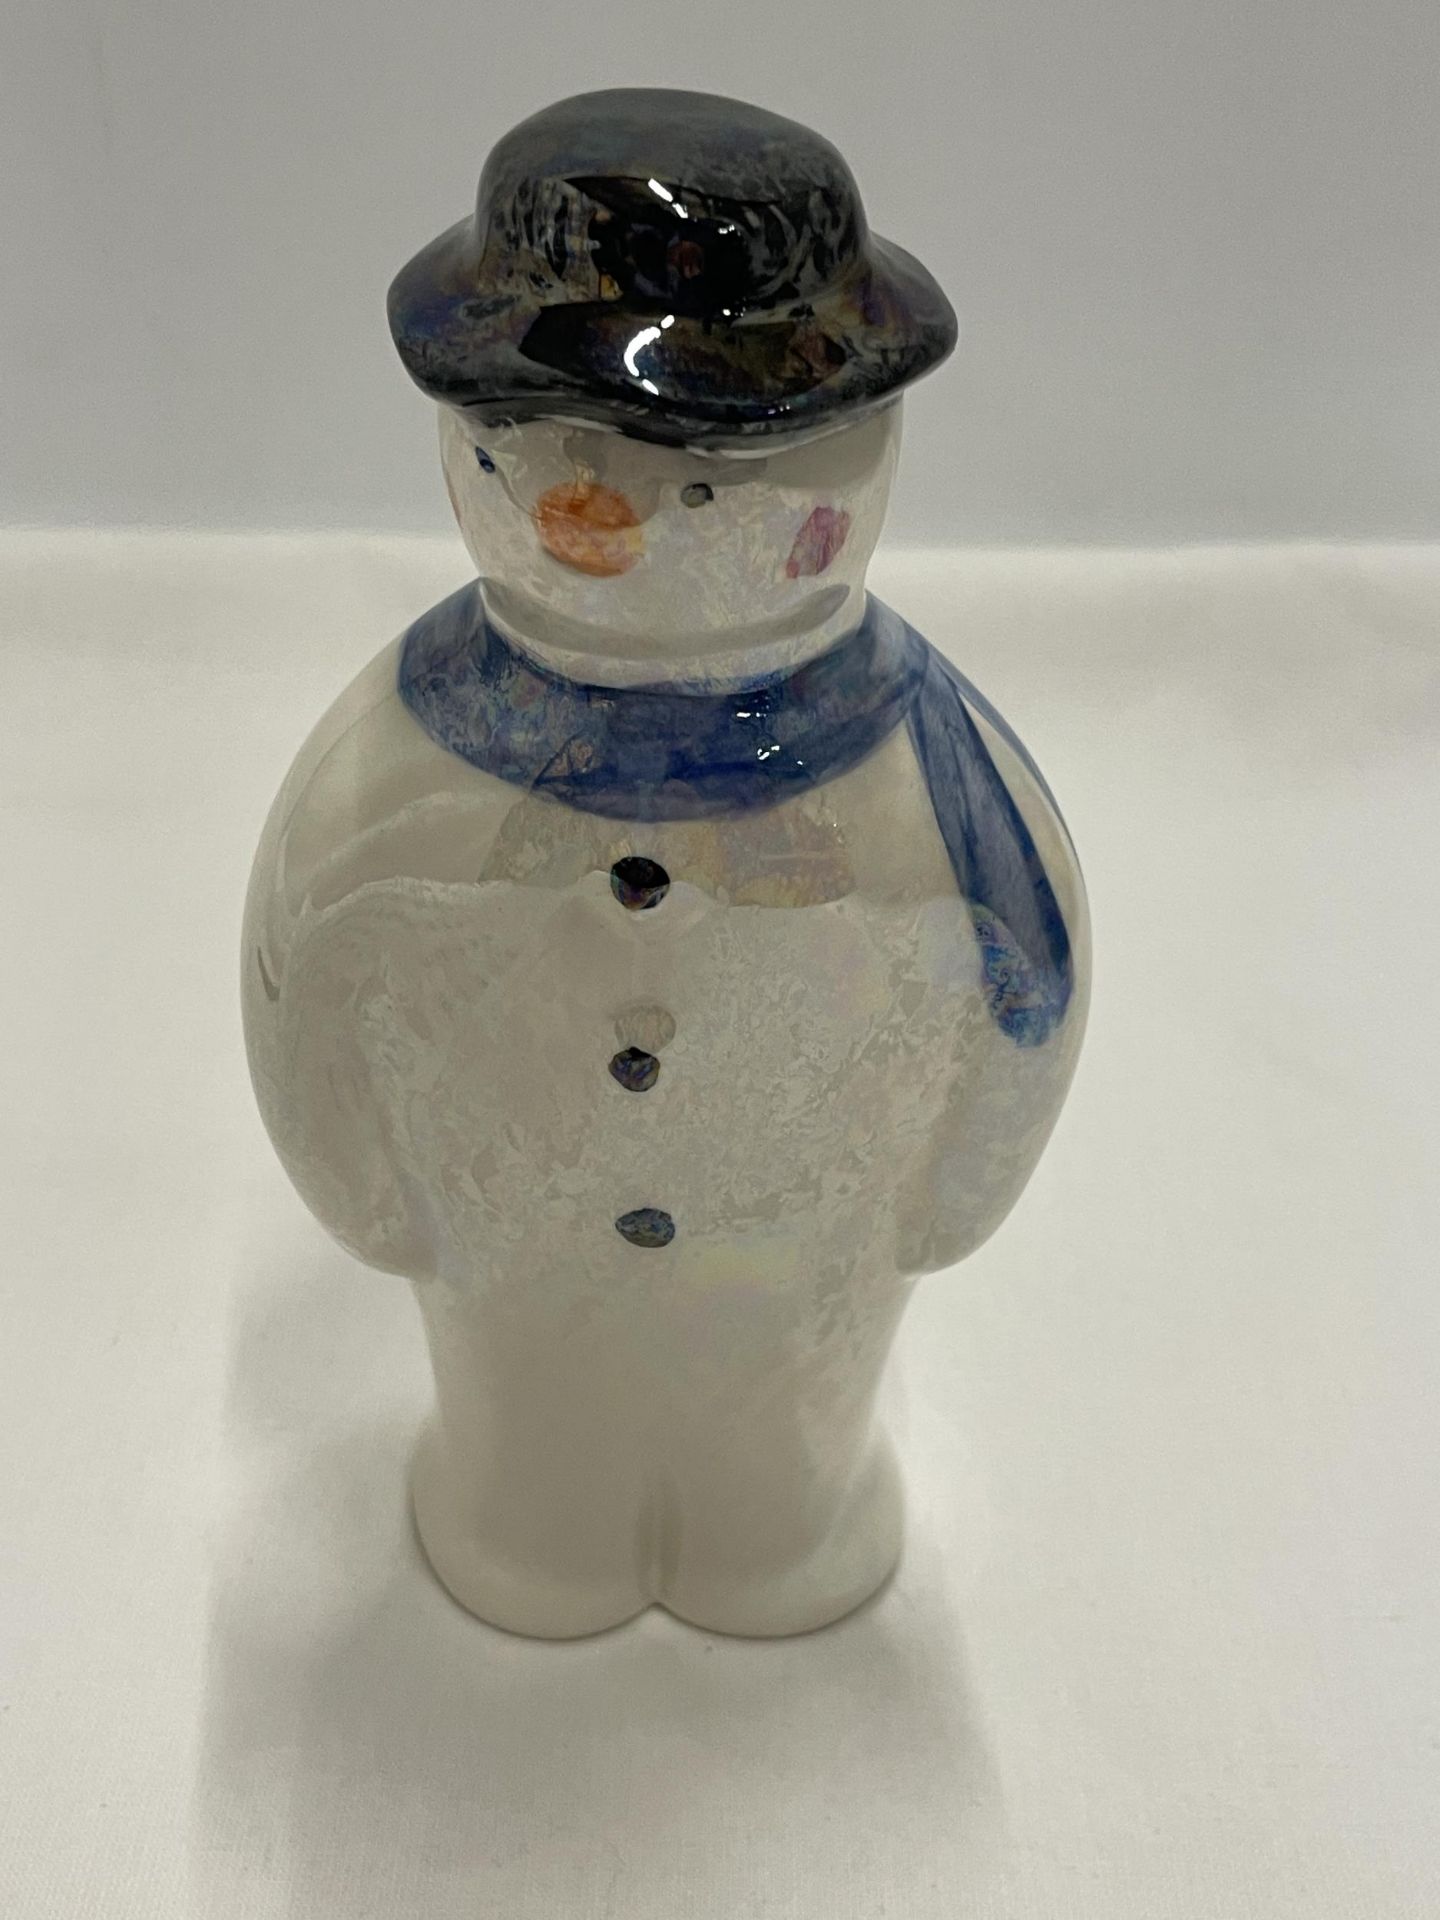 AN ANITA HARRIS HAND PAINTED AND SIGNED IN GOLD SNOWMAN FIGURE